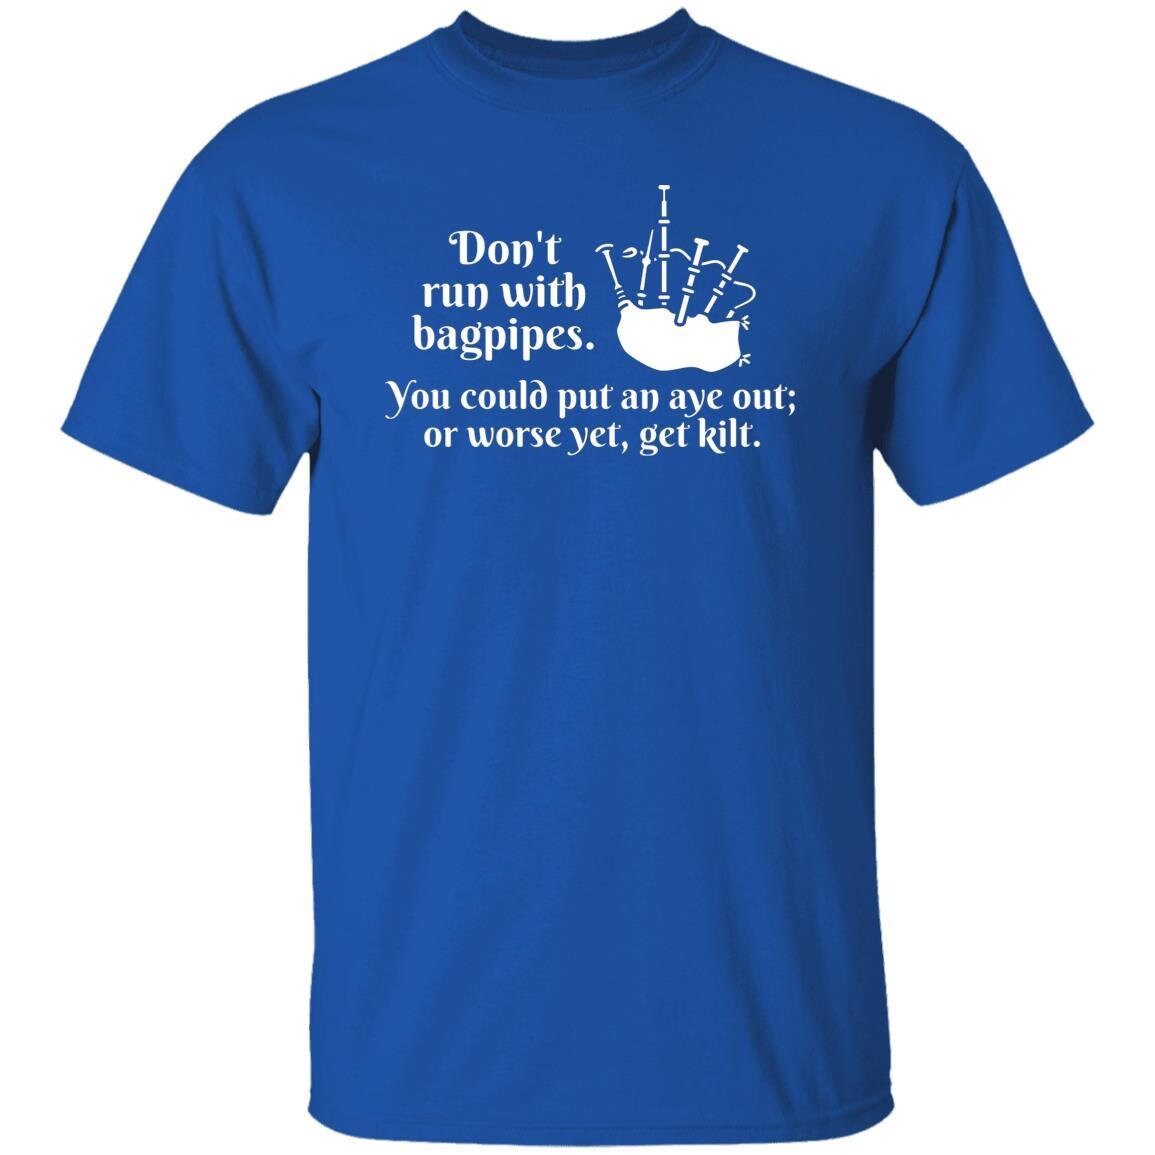 Don't run with bagpipes. T-Shirt